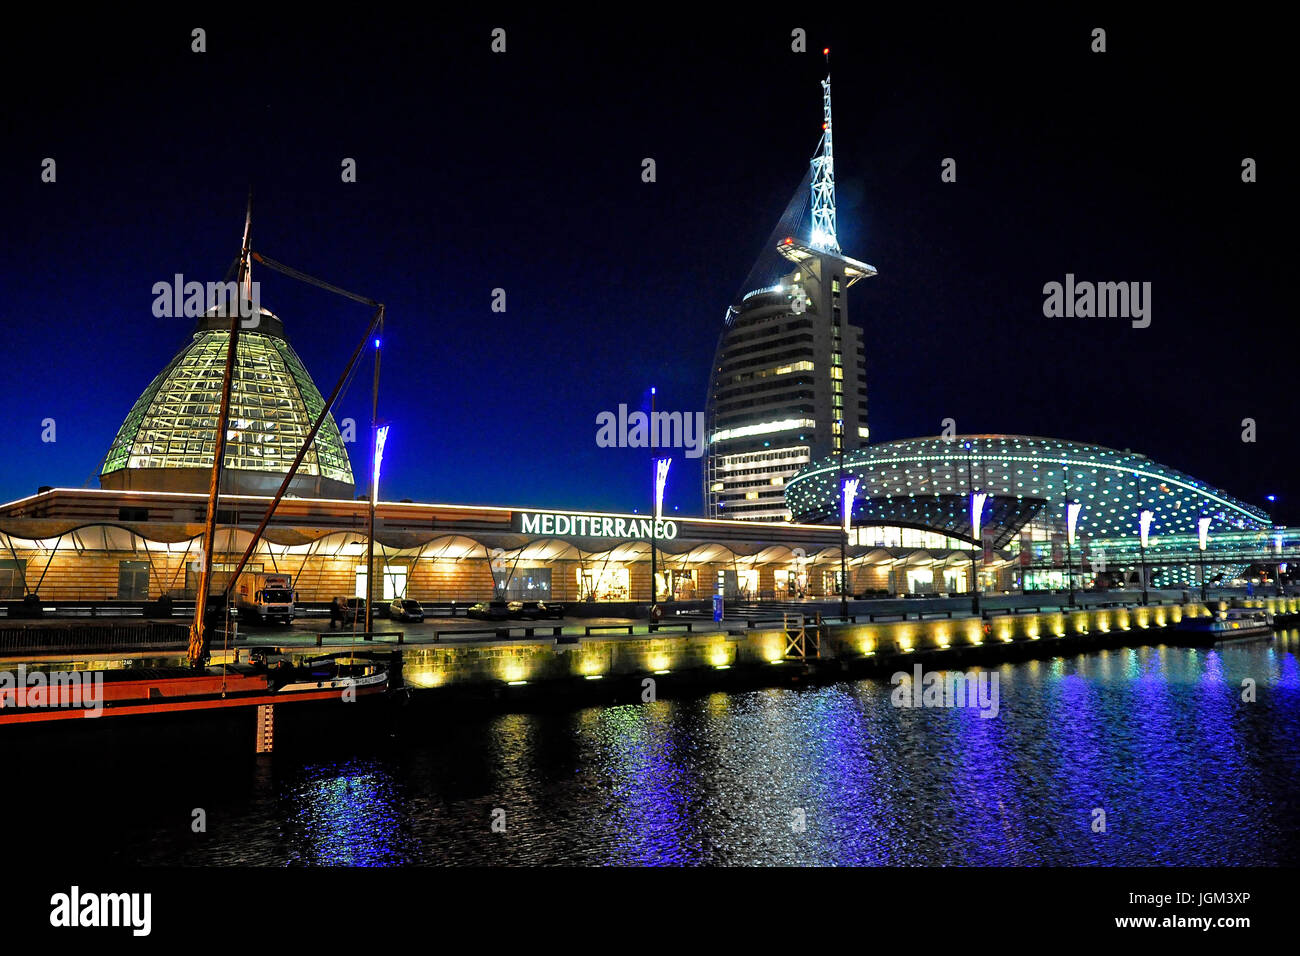 The Federal Republic of Germany, Bremerhaven, harbour worlds, Sail city, building, architecture, Mediterraneo, hotel, night admission, horizontal form Stock Photo